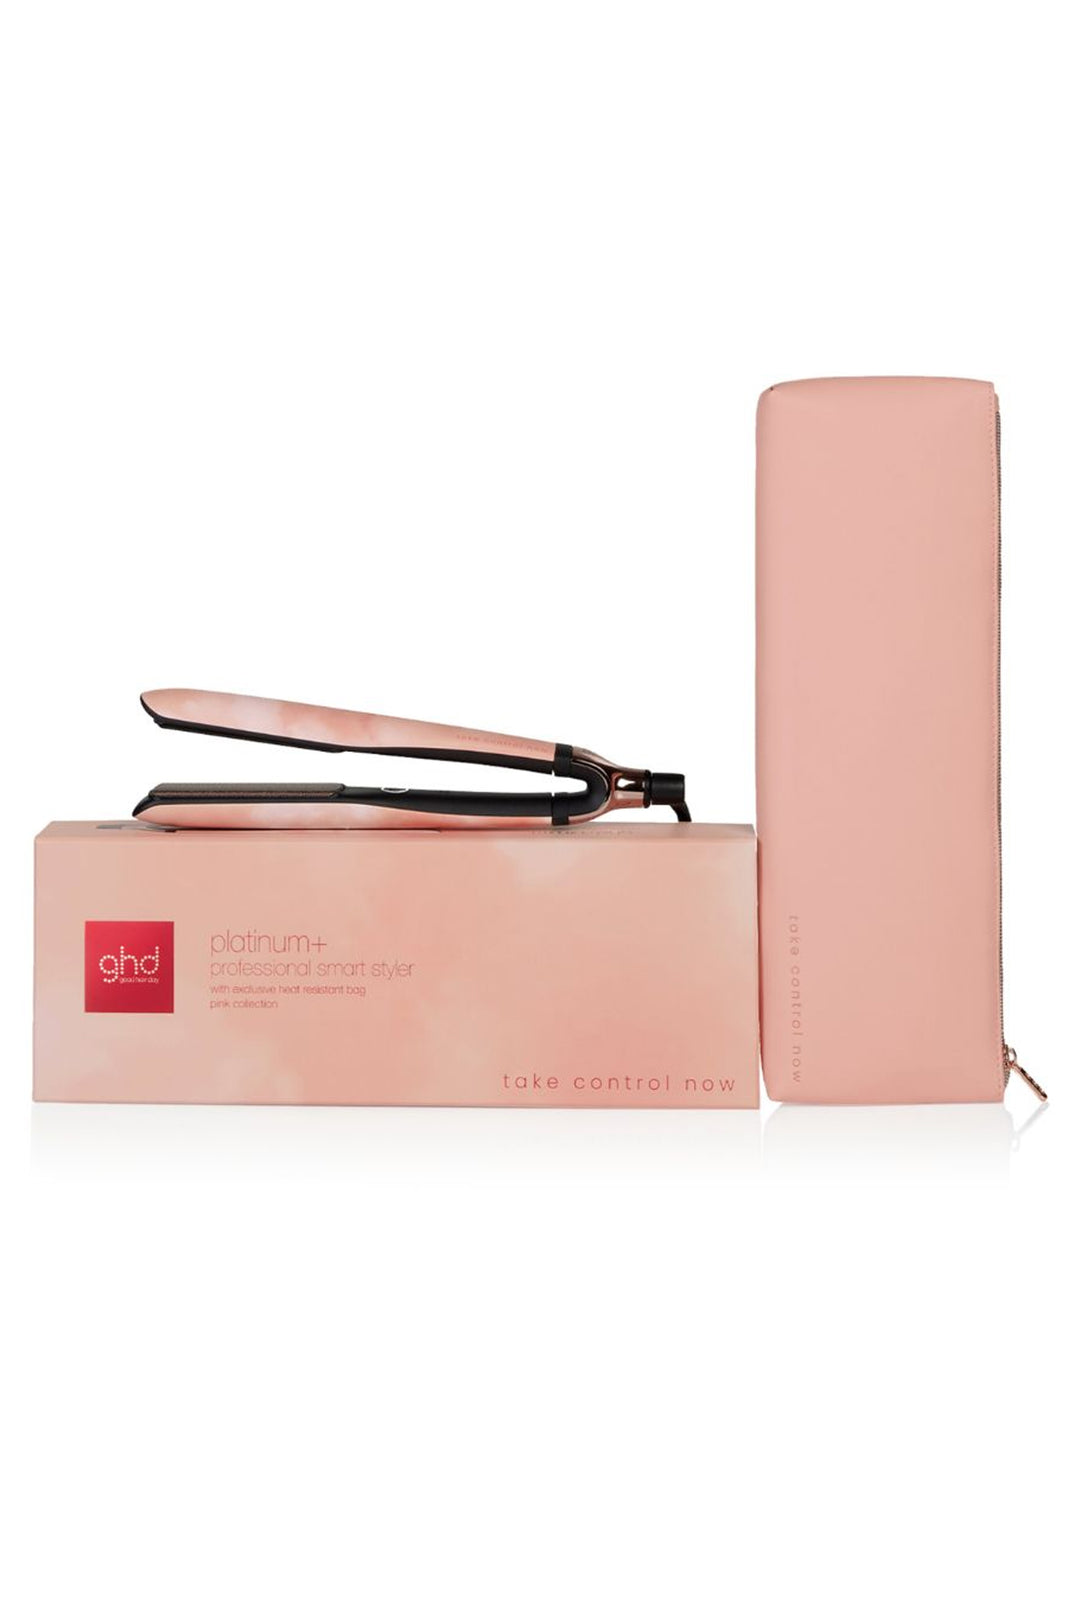 GHD PLATINUM+ TAKE CONTROL NOW PINK COLLECTION